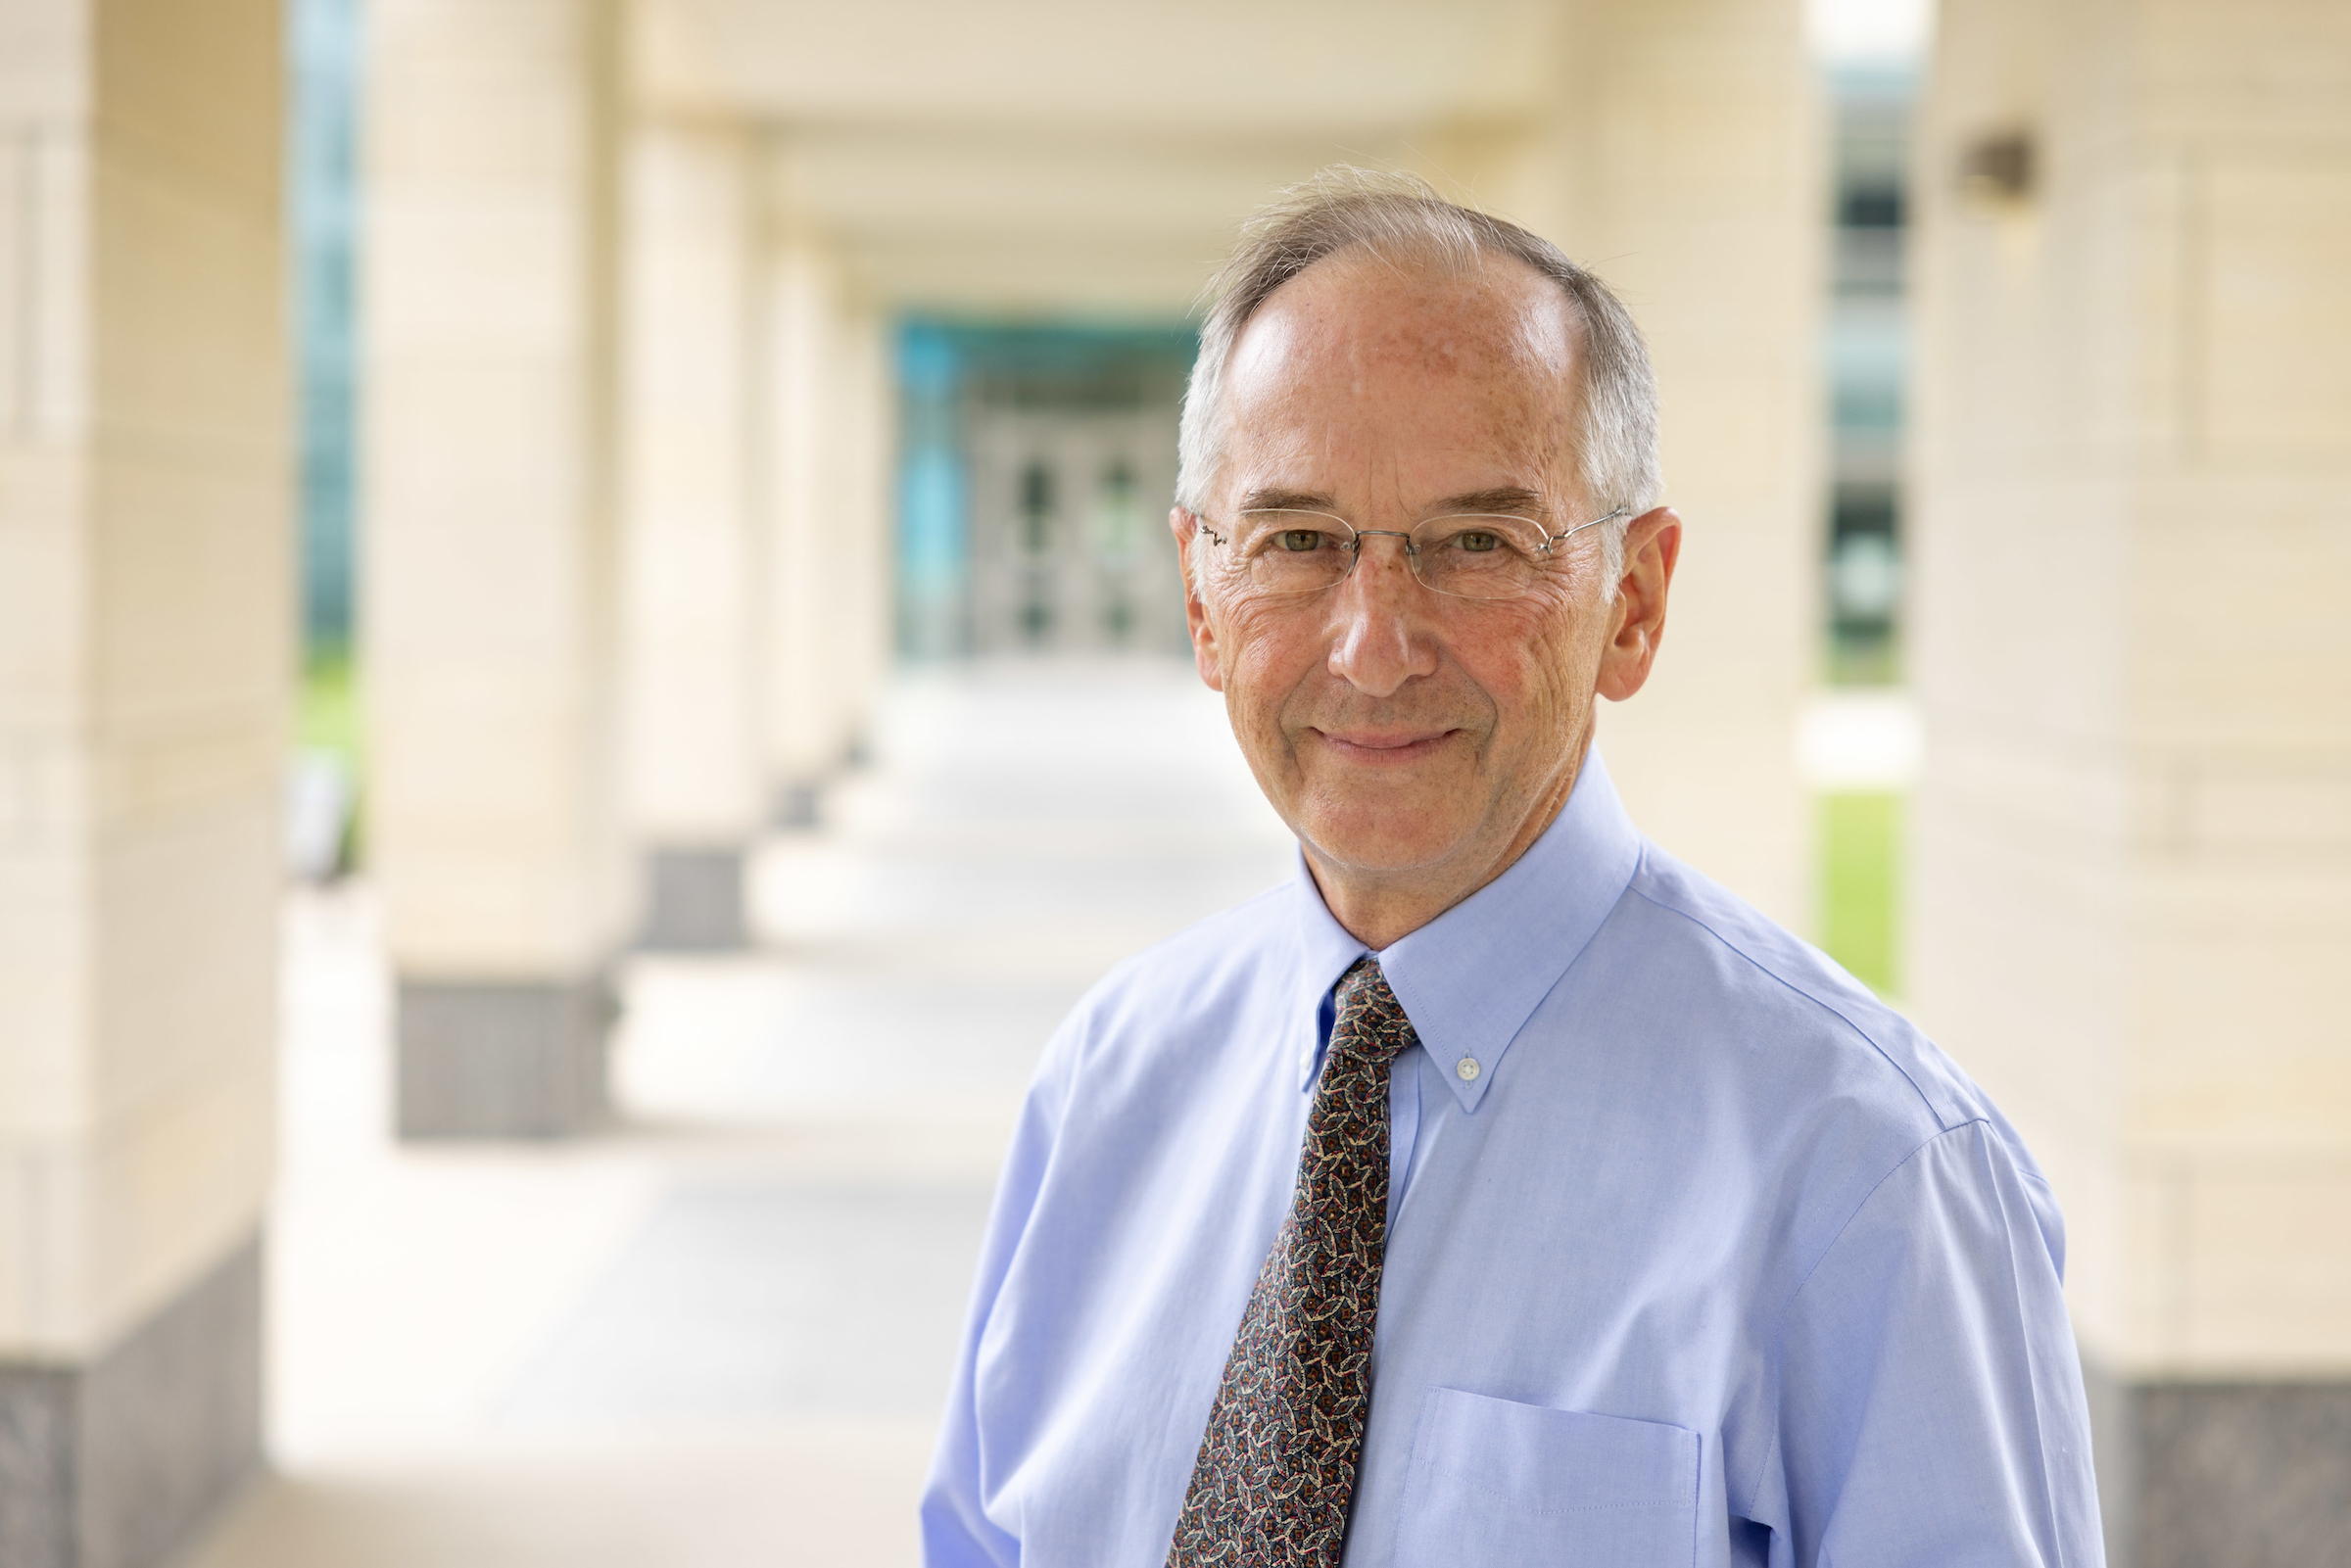 Michael Welsh, pictured in 2022, has researched mechanisms and treatment of cystic fibrosis for decades. CREDIT UNIVERSITY OF IOWA